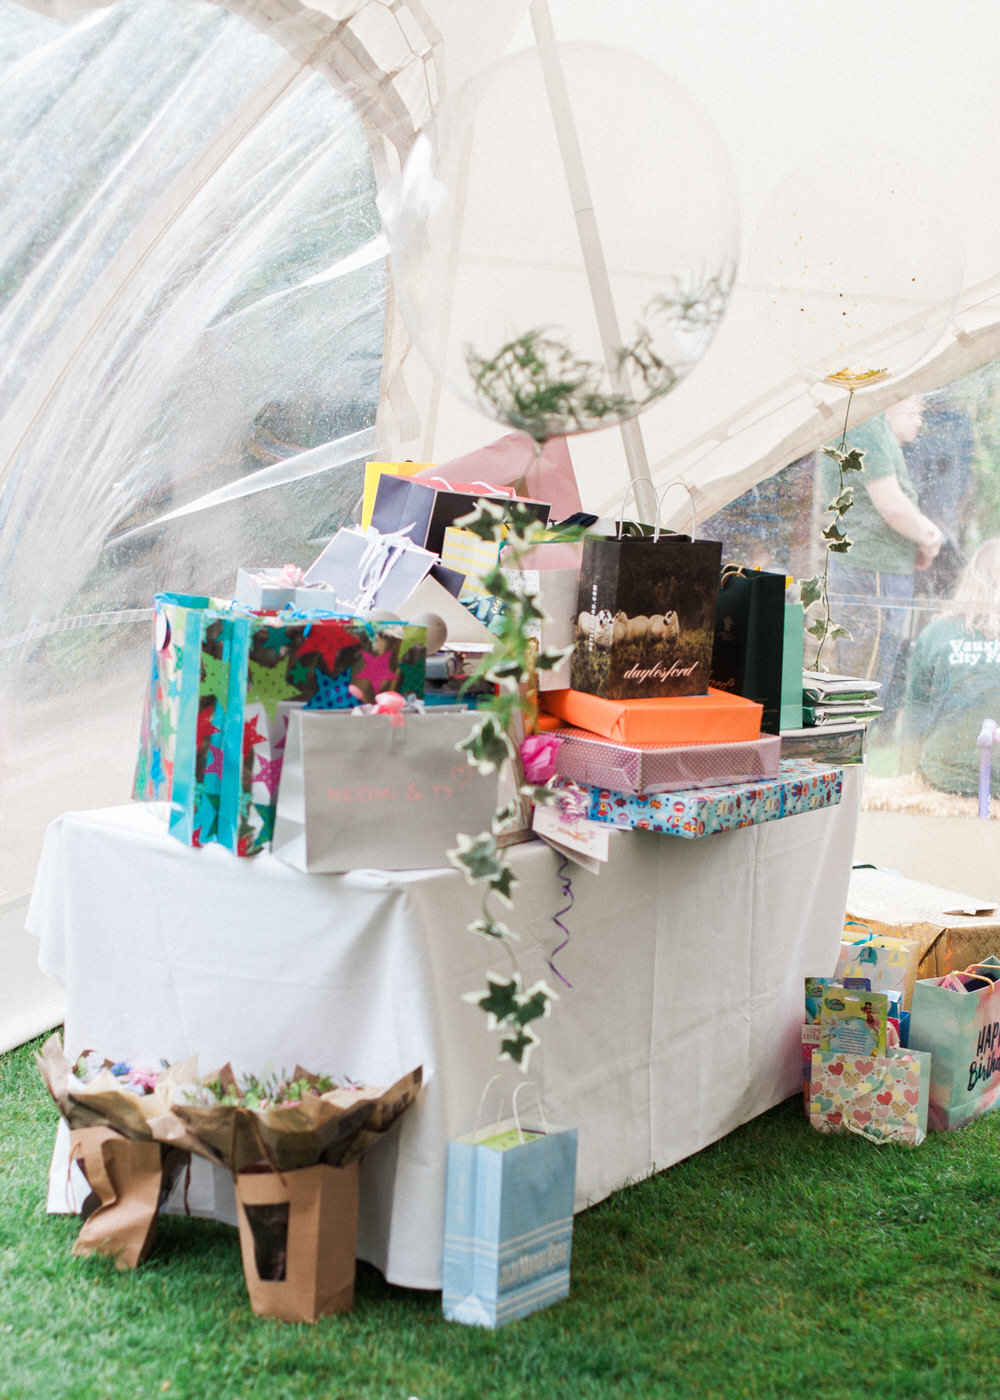 A Midsummer nights dream inspired children's birthday party with stunning floral, fairy entertainment, crafts and a picnic. Photos by Kate Nielen.